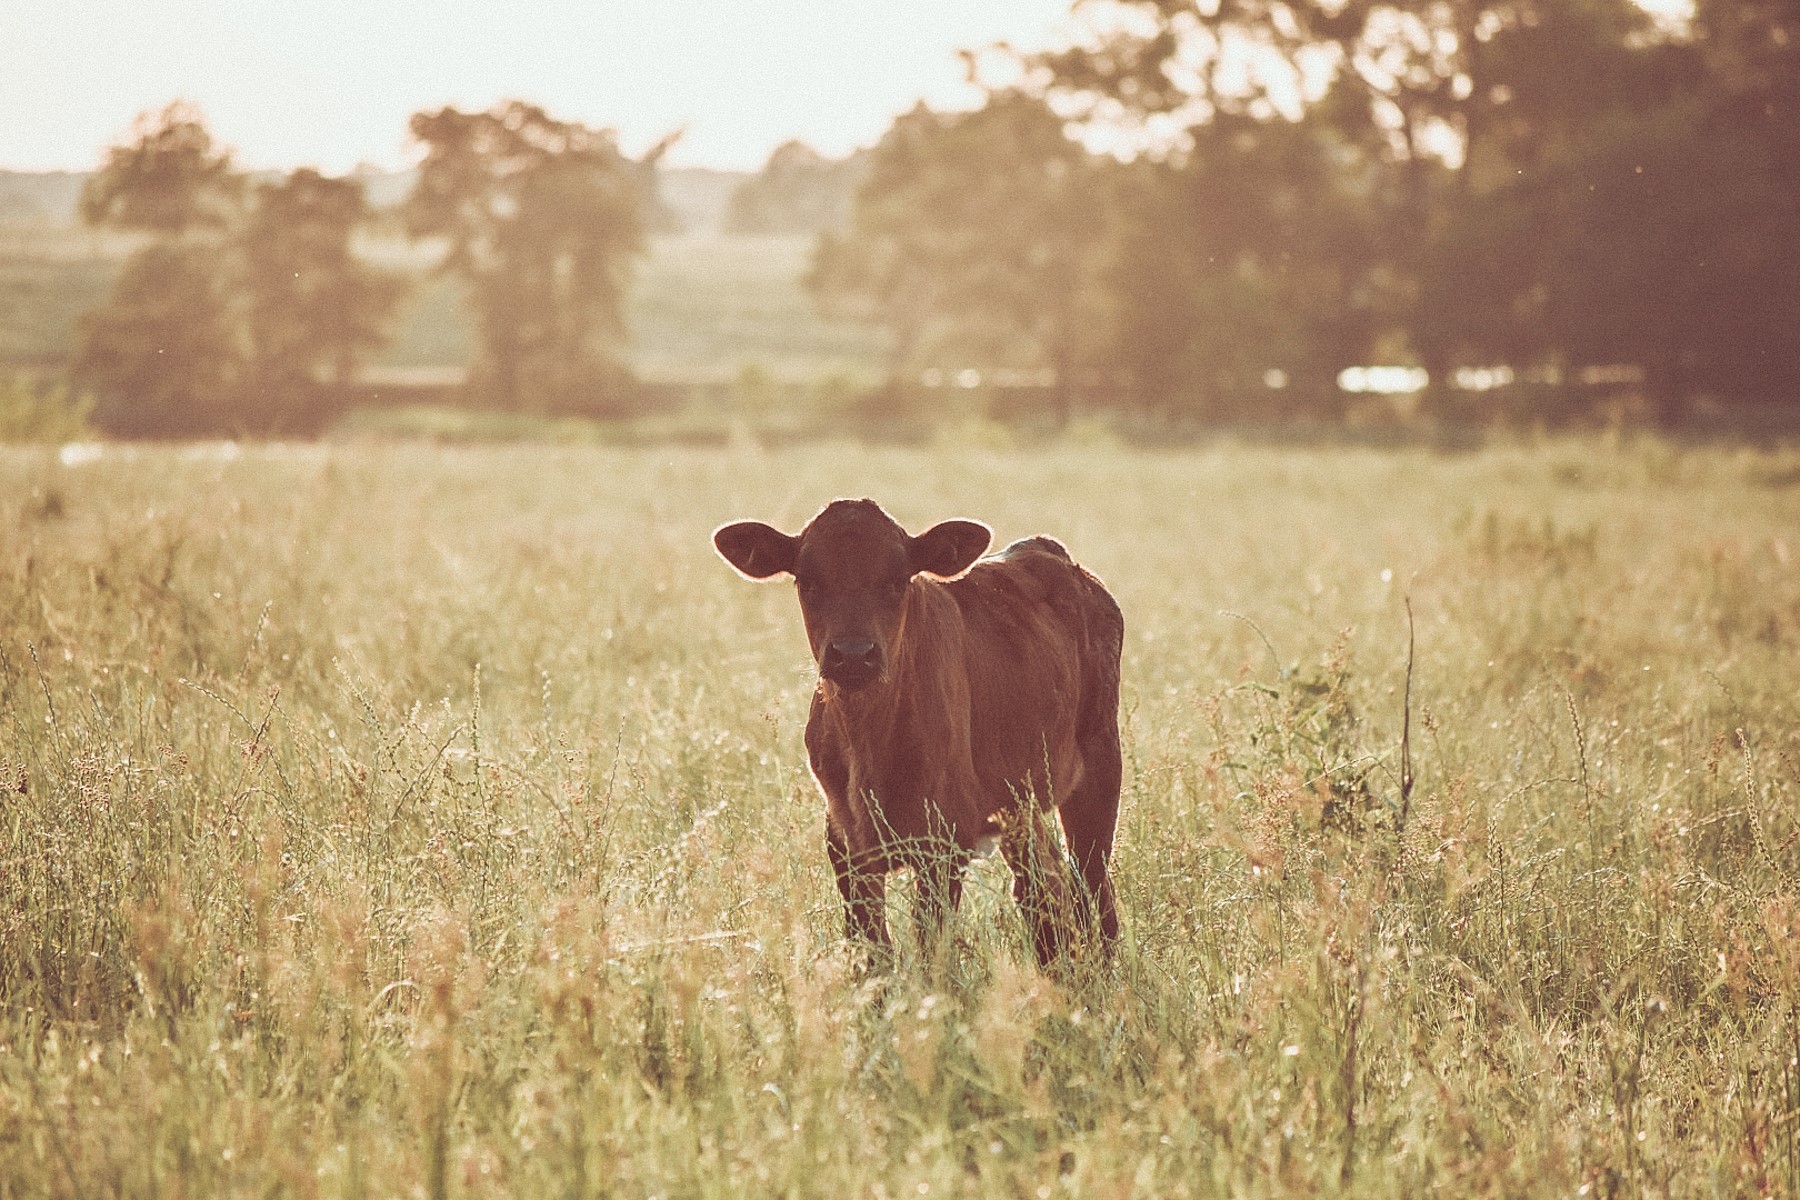 Black Angus calf standing in a pasture at sunset.